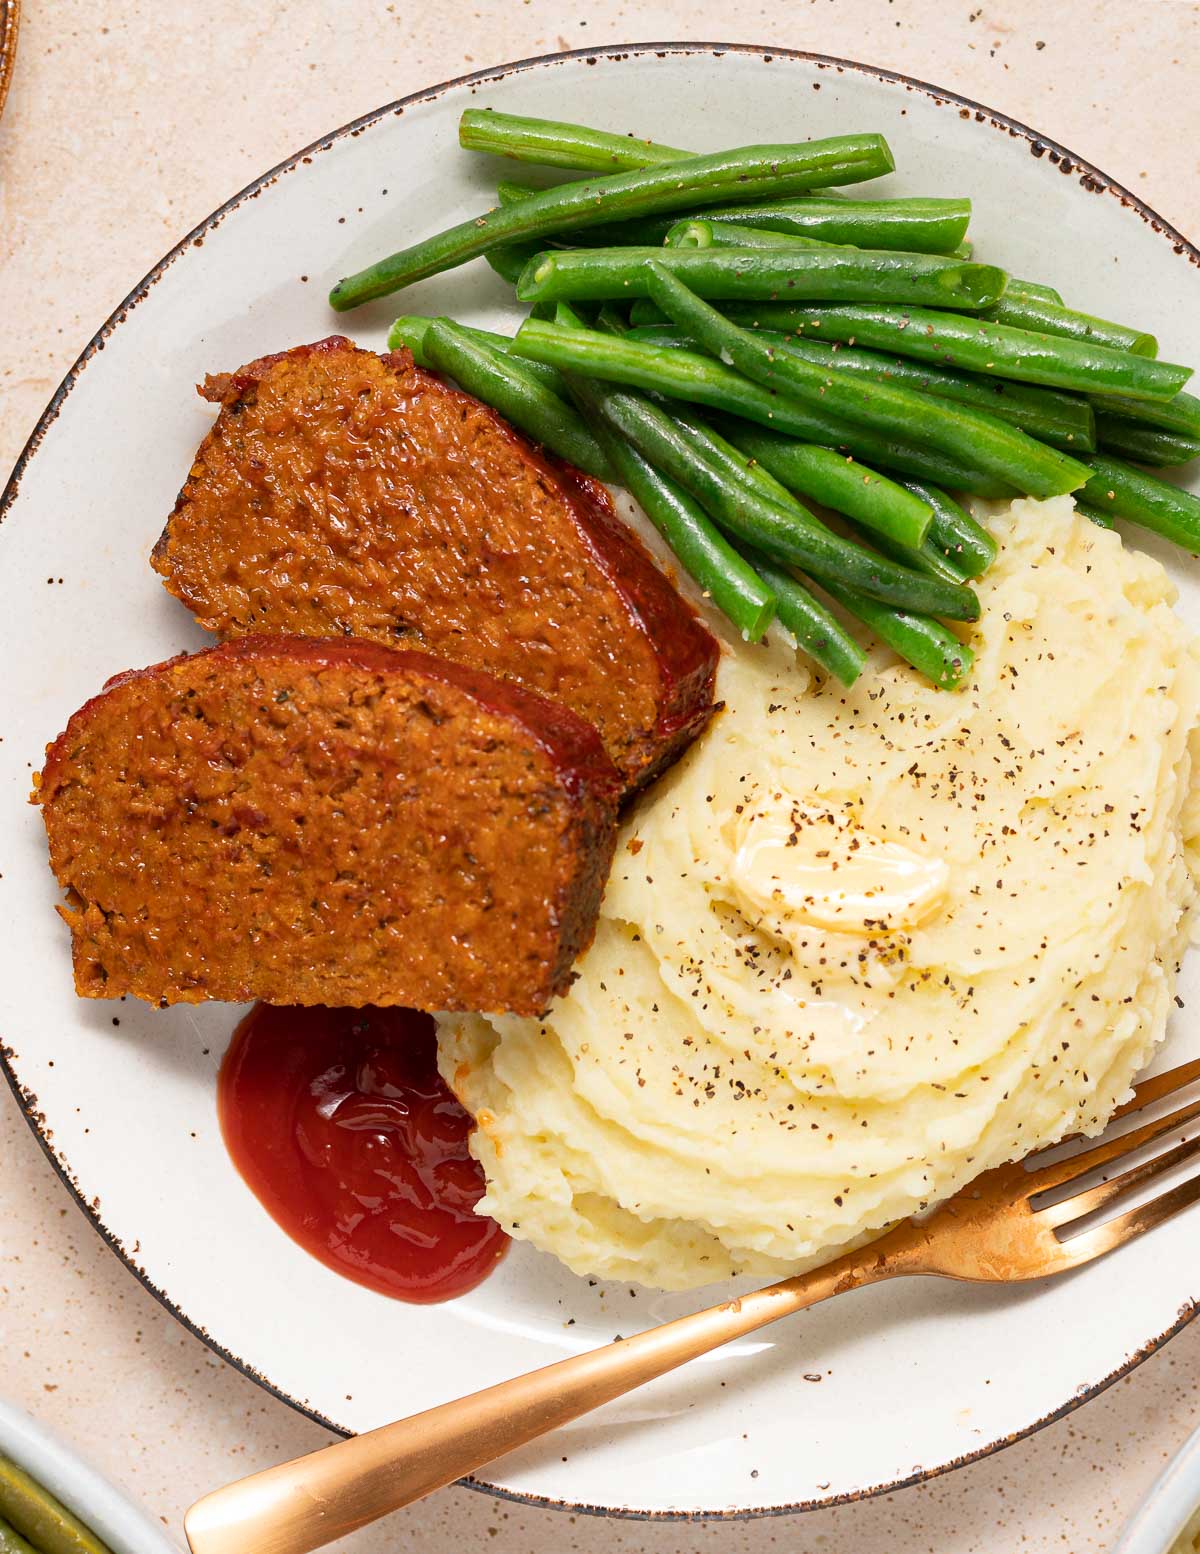 2 slices of meatloaf on a plate with mashed potato and green beans